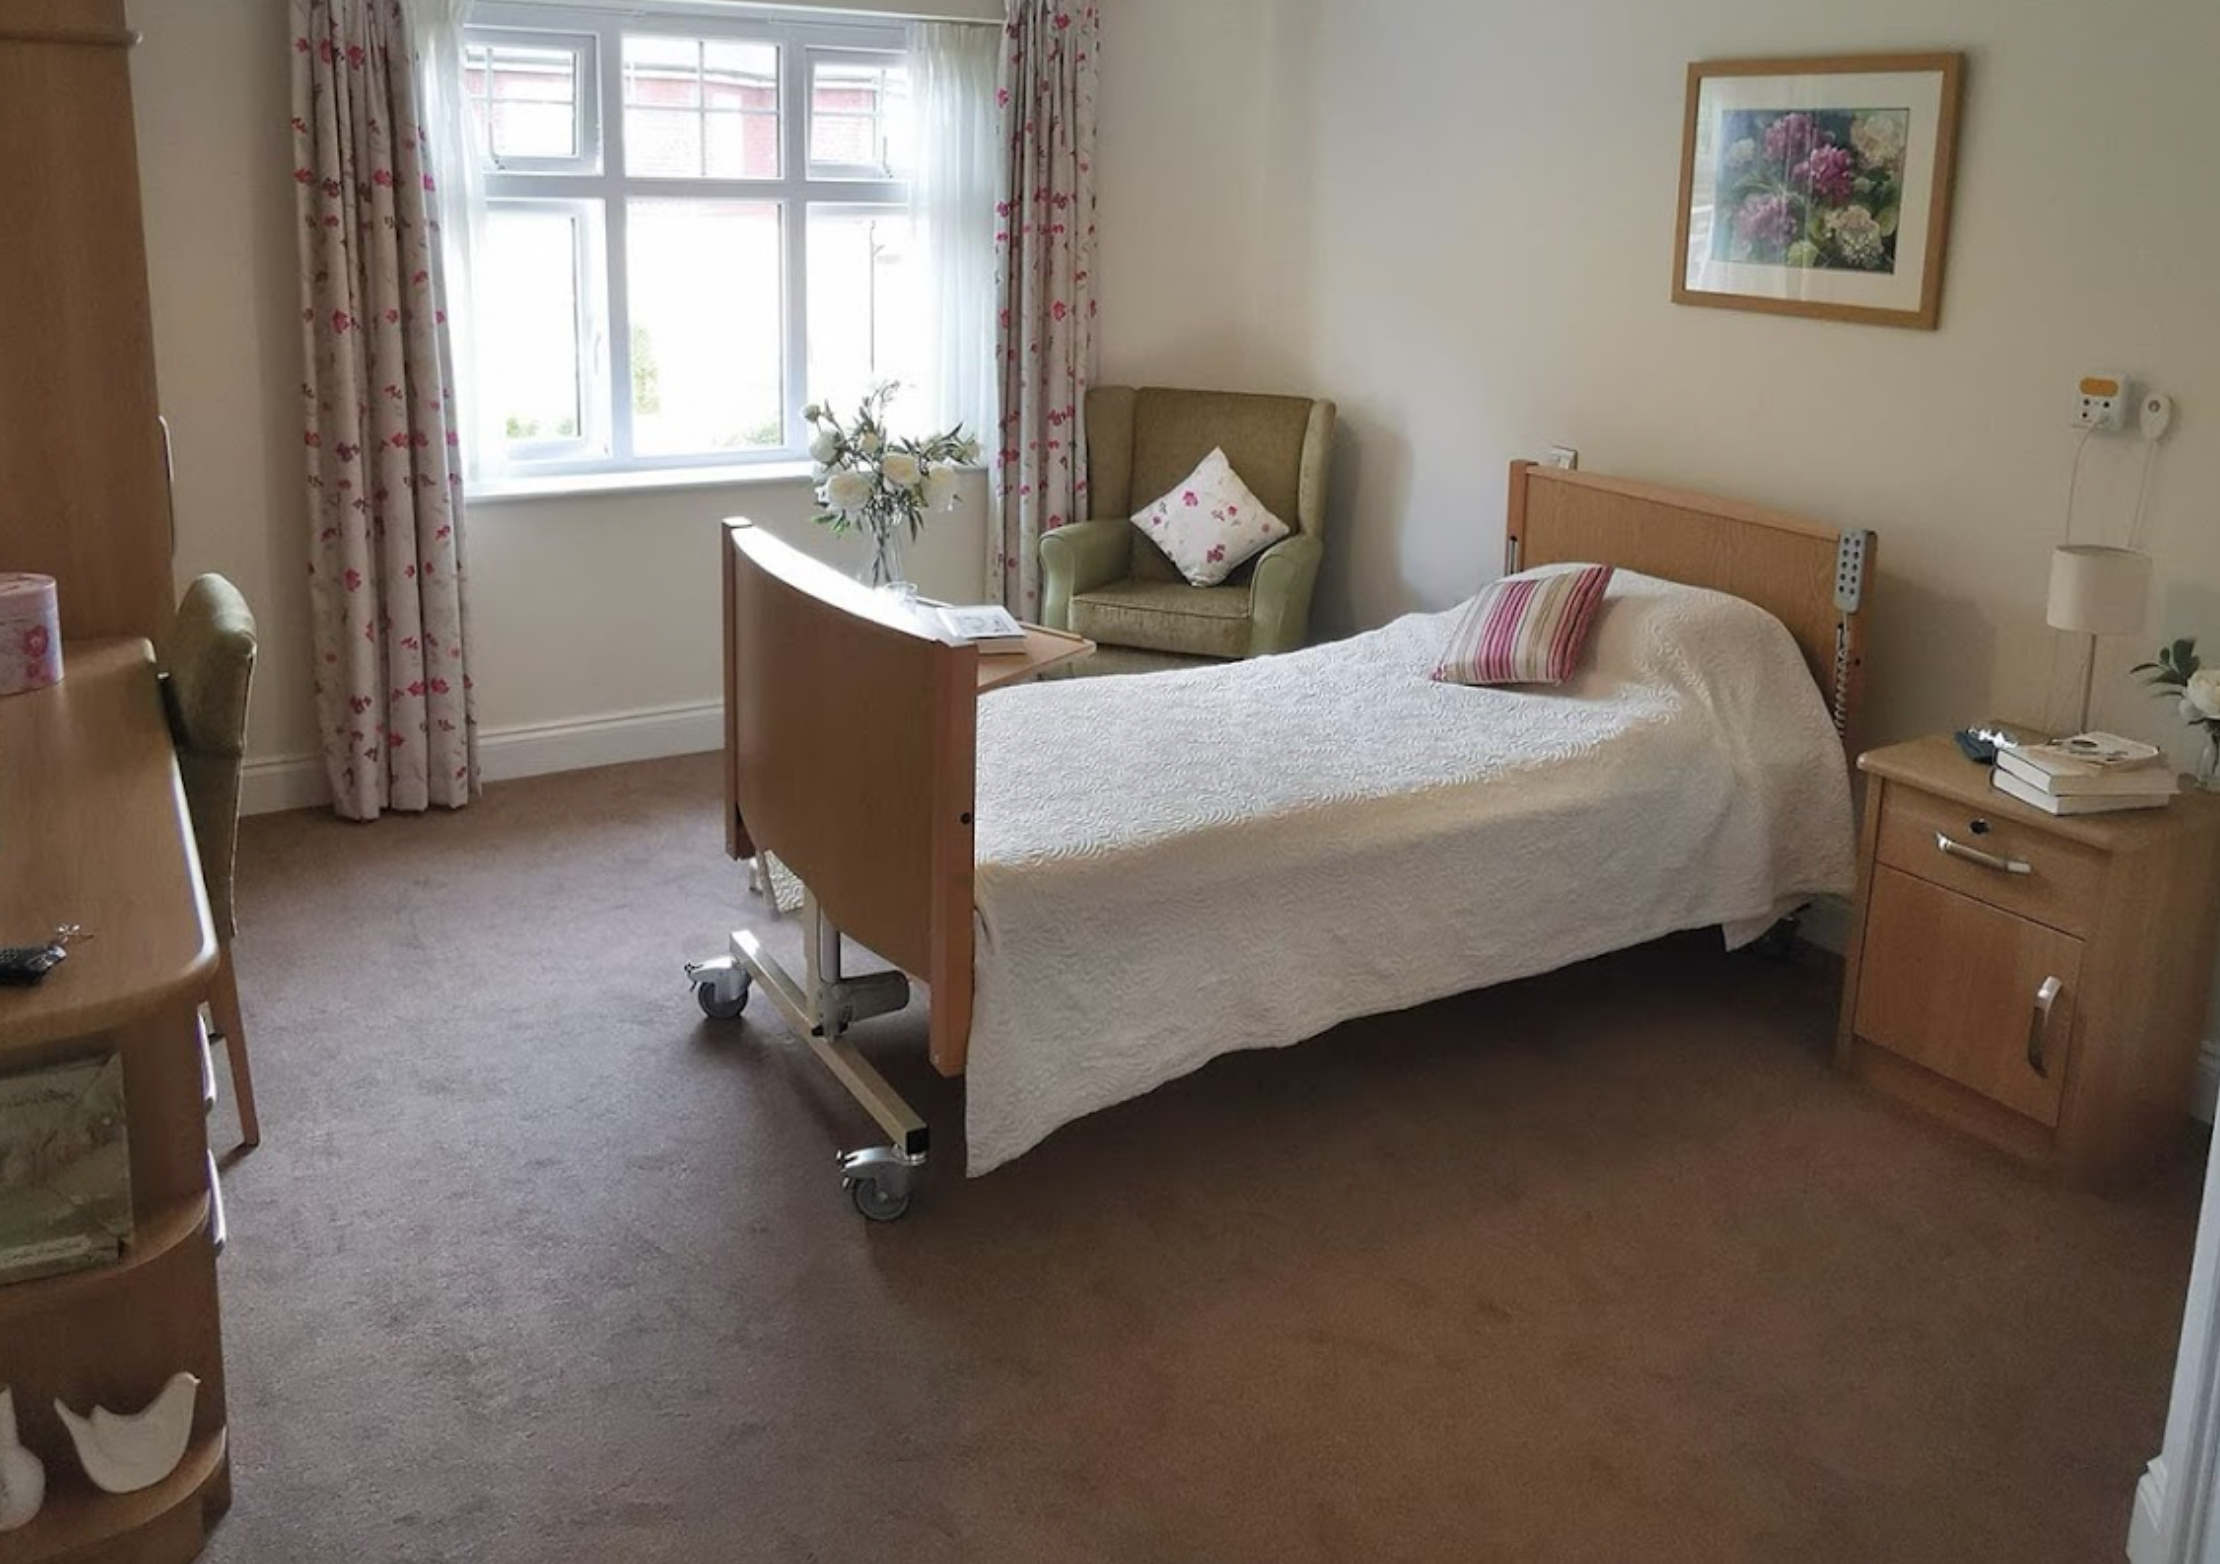 Bedroom of St. Ives Country House care home in St Ives, Ringwood